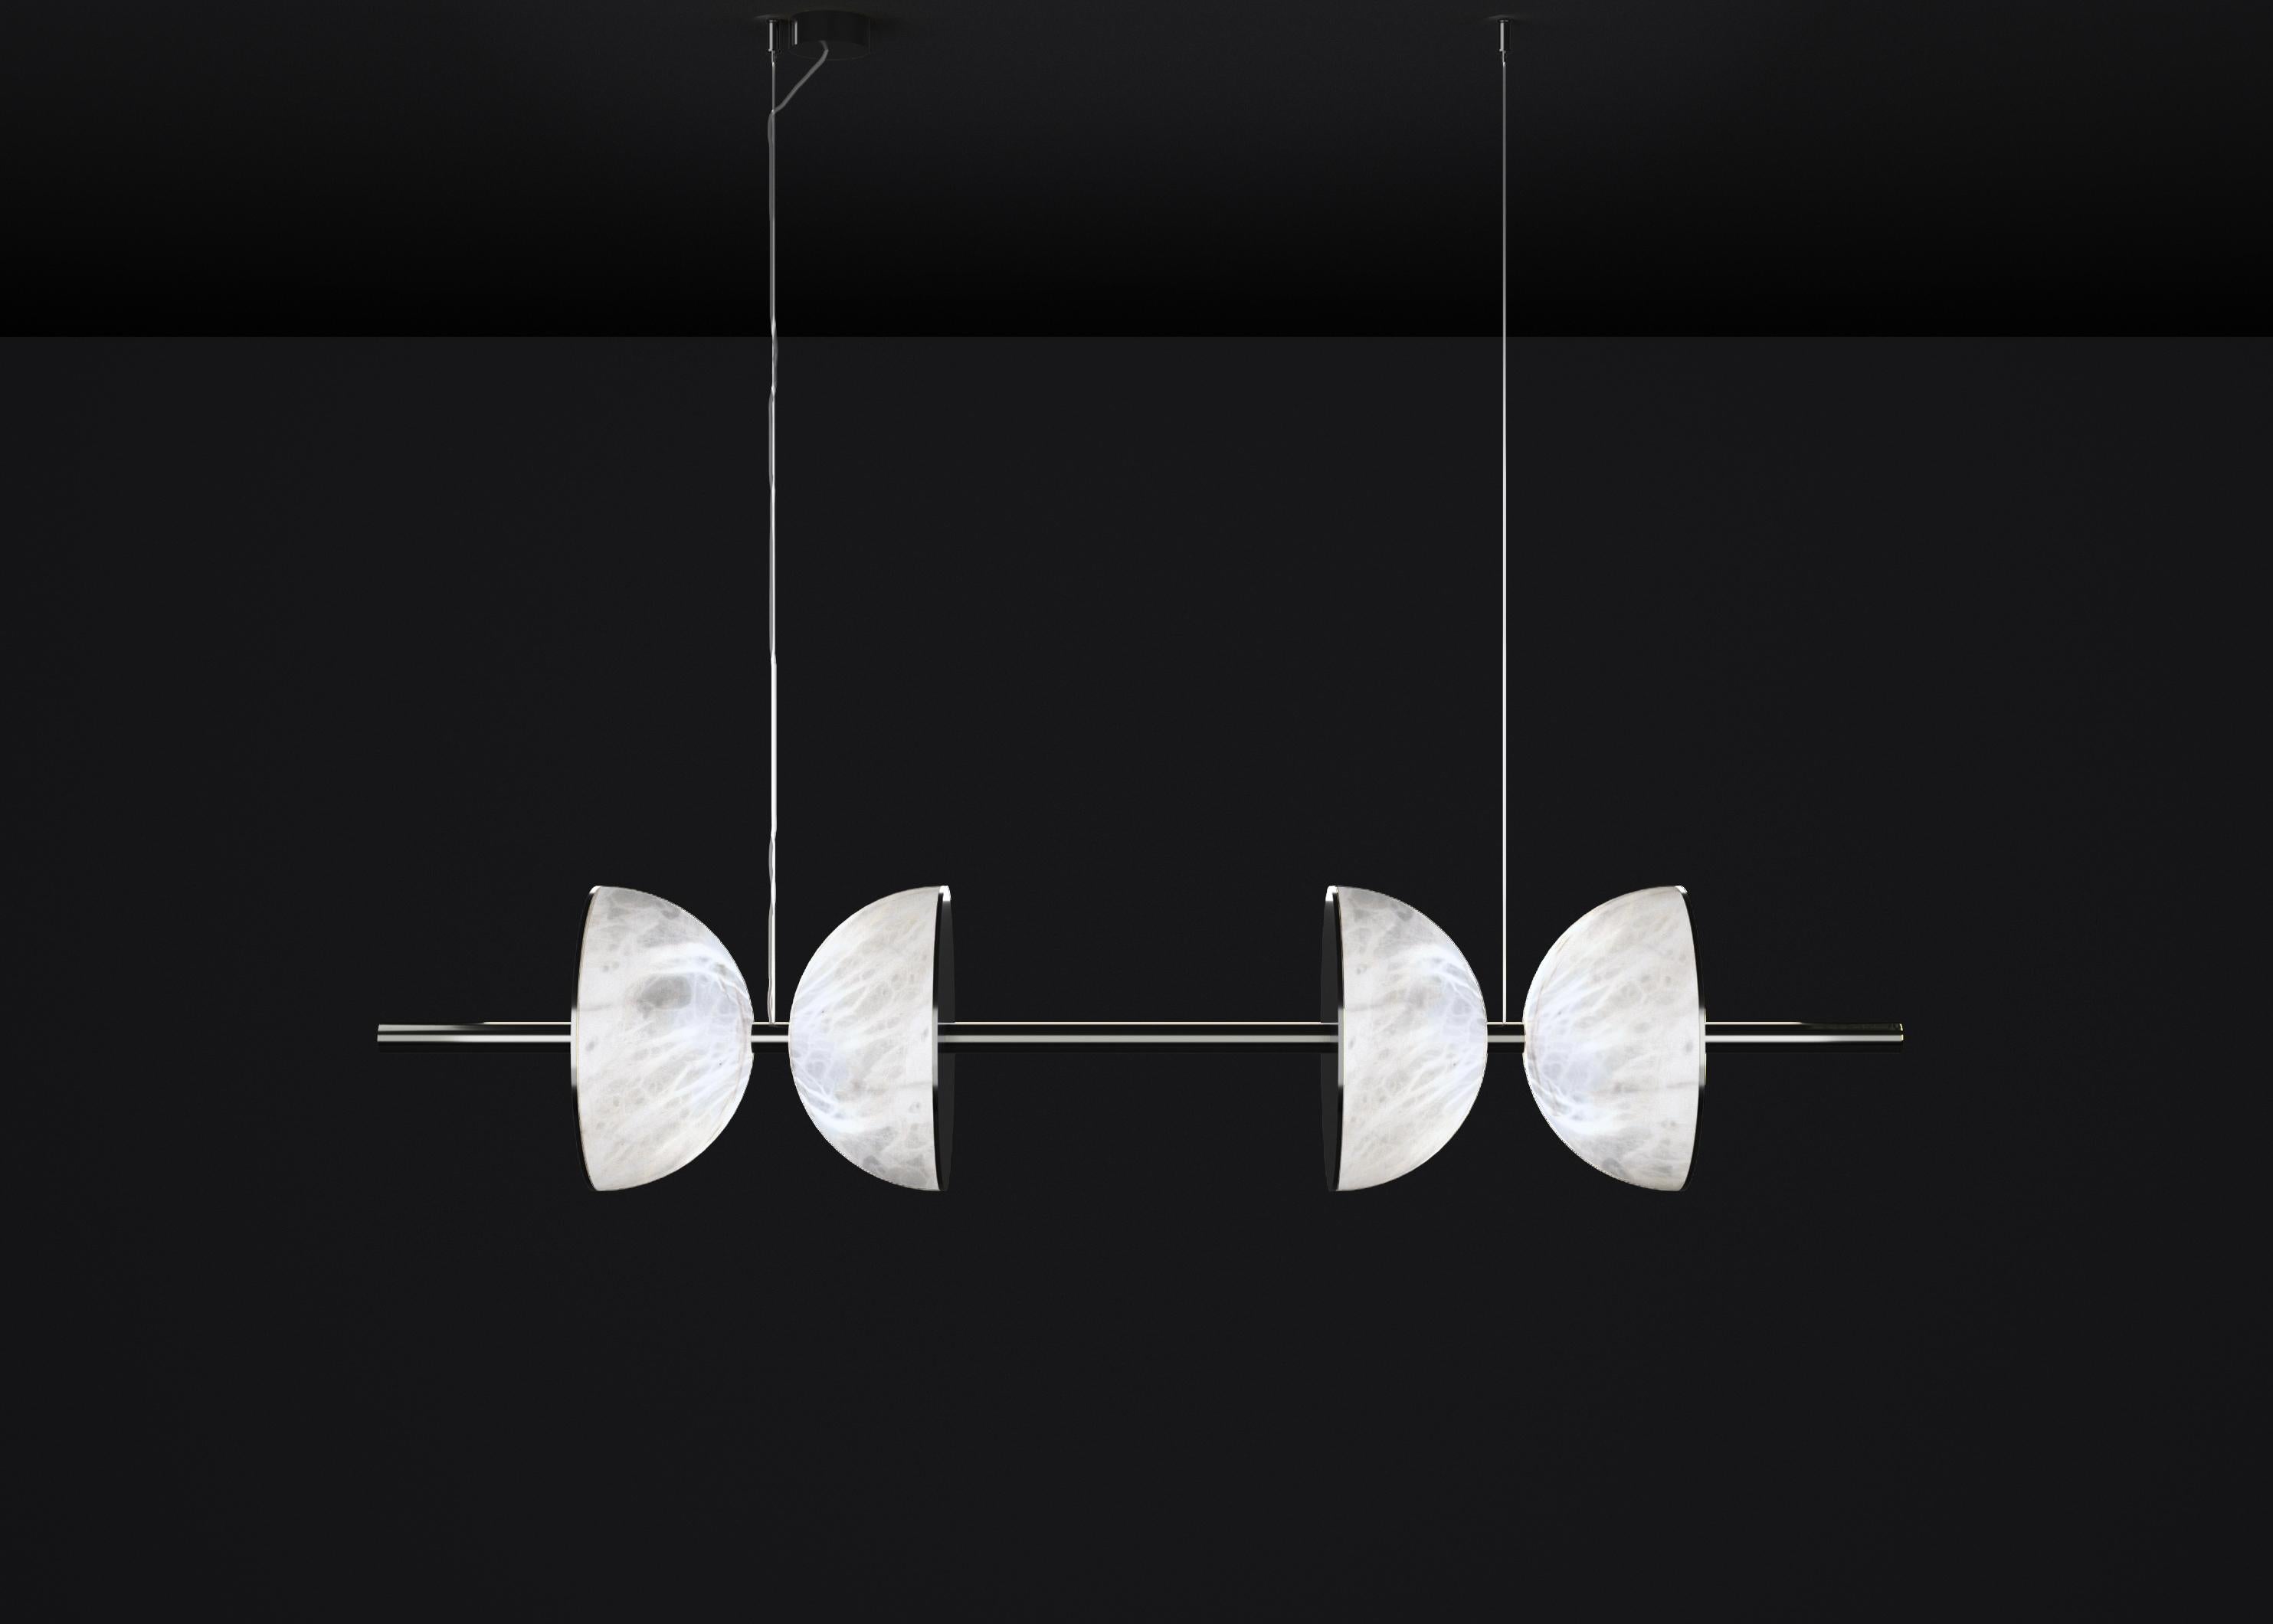 Ermes Shiny Black Metal And Alabaster Pendant Light 2 by Alabastro Italiano
Dimensions: D 30 x W 150 x H 300 cm.
Materials: White alabaster and shiny black metal.

Available in different finishes: Shiny Silver, Bronze, Brushed Brass, Ruggine of